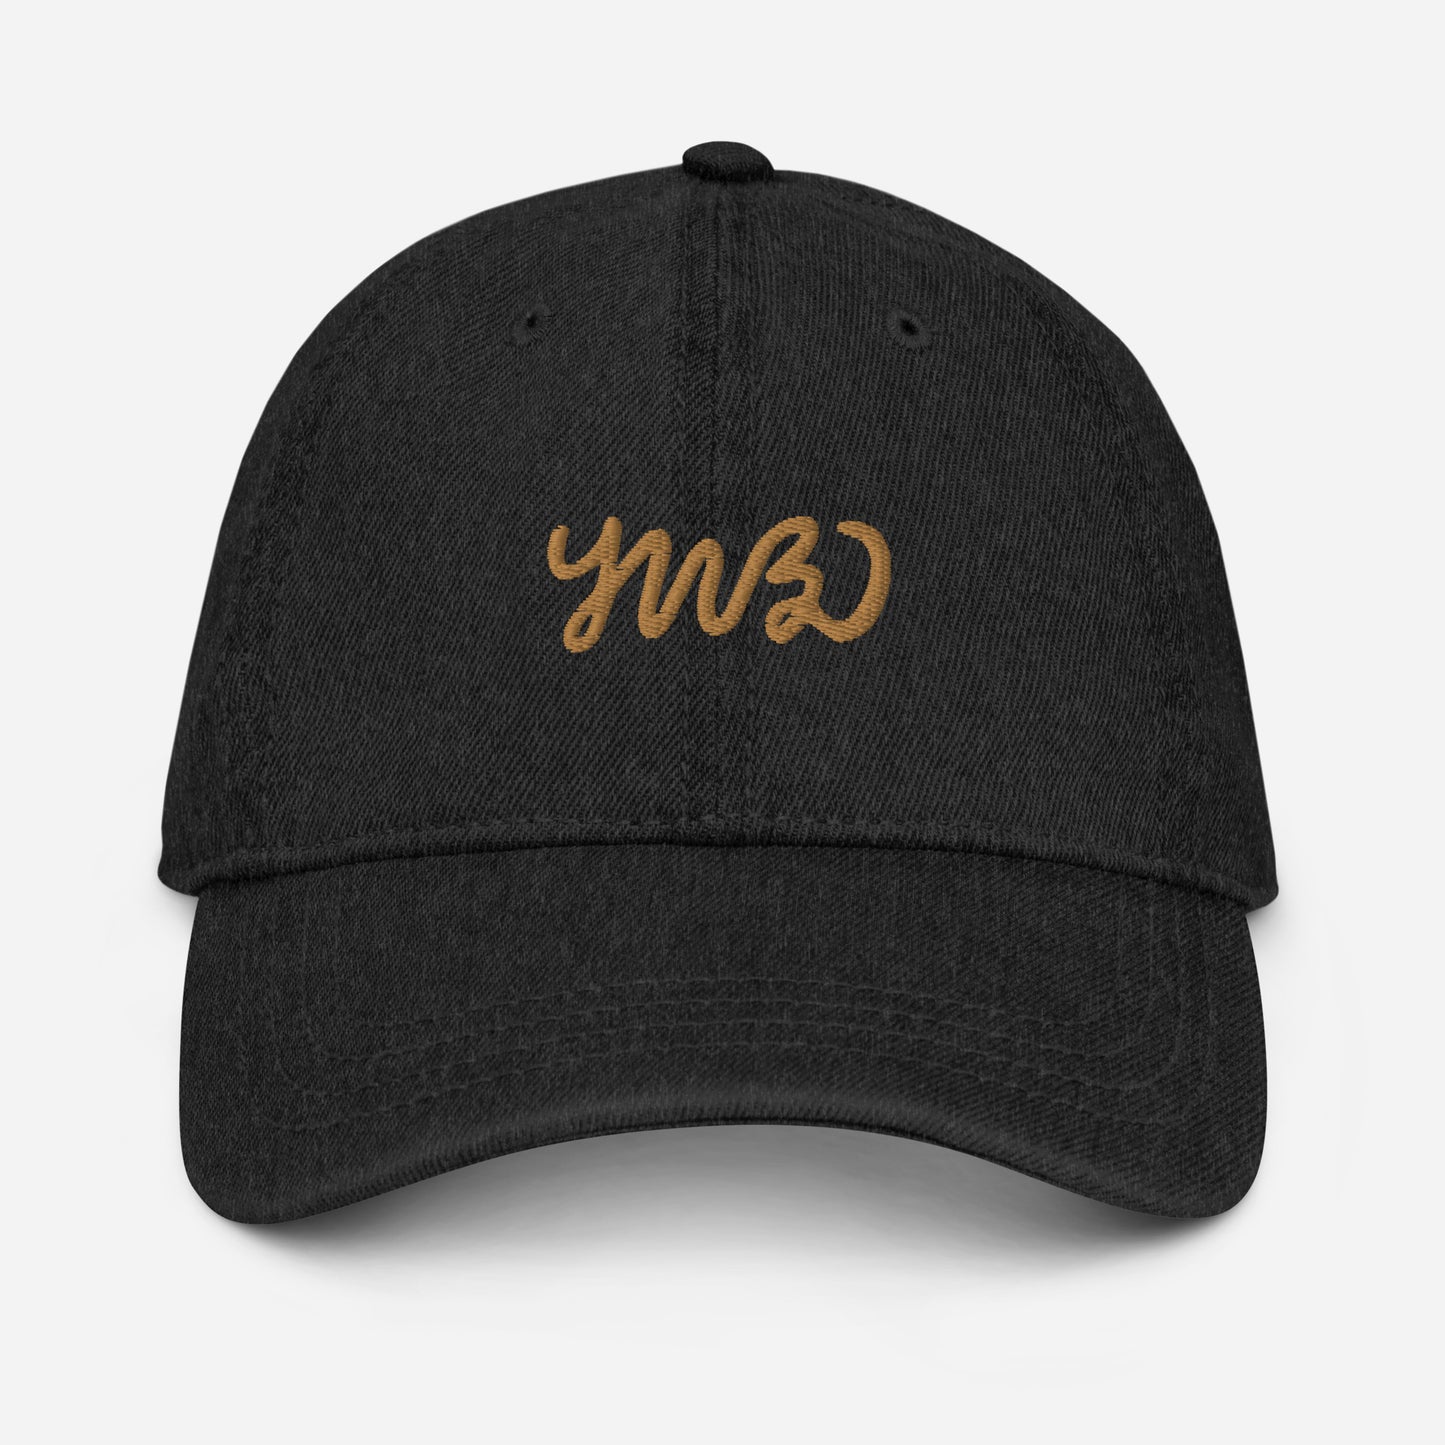 Embroidered Denim Hat - YWBD - A Thousand Elsewhere